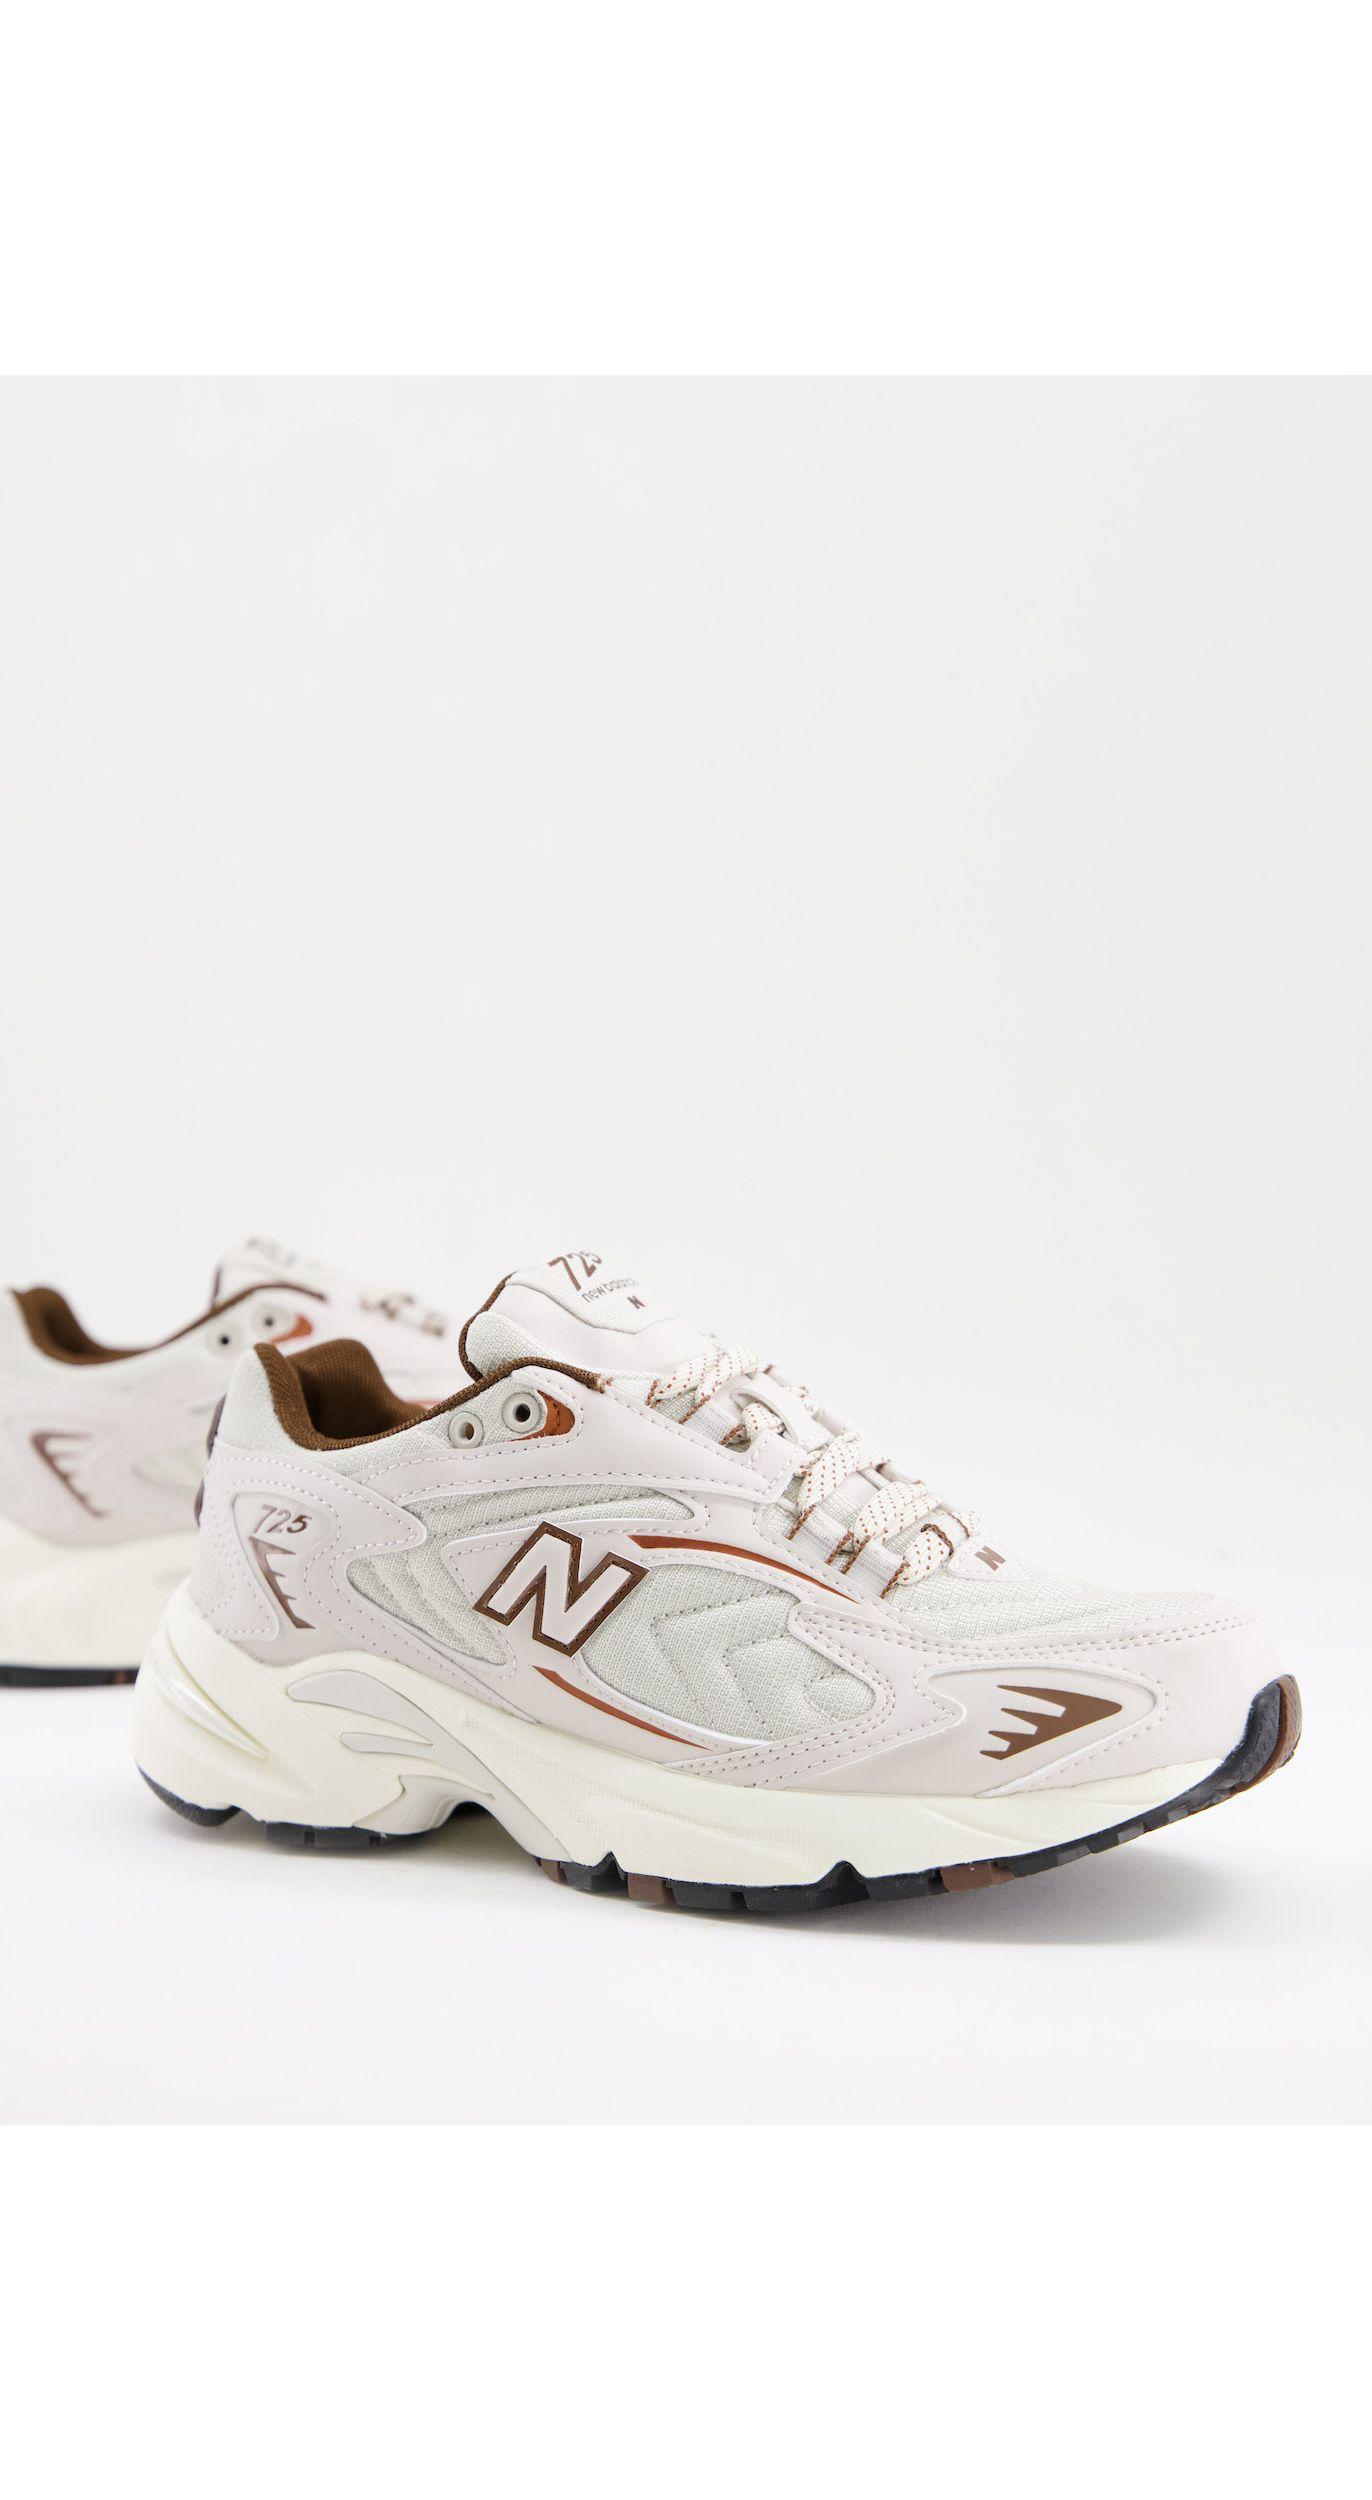 New Balance 725 Cookie Trainers | Lyst